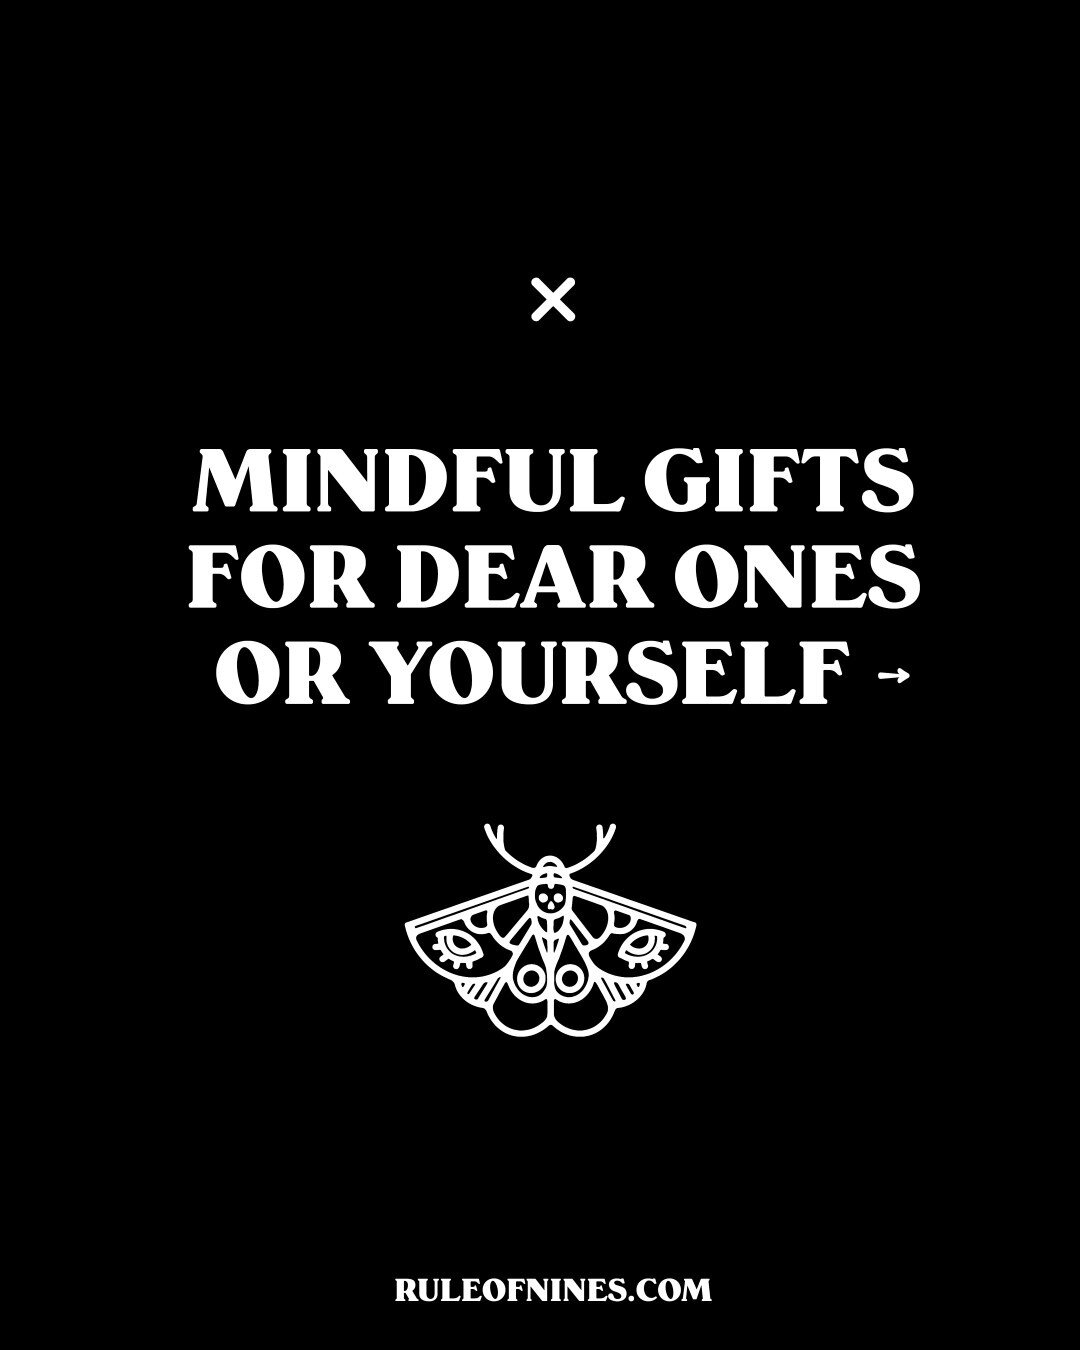 MINDFUL GIFTS ✖ ruleofnines.com

In a world often consumed by materialism, the true essence of gift-giving lies in thoughtful gestures rather than price tags. Mindful gifts, rooted in consideration and sincerity, transcend monetary value, leaving a l